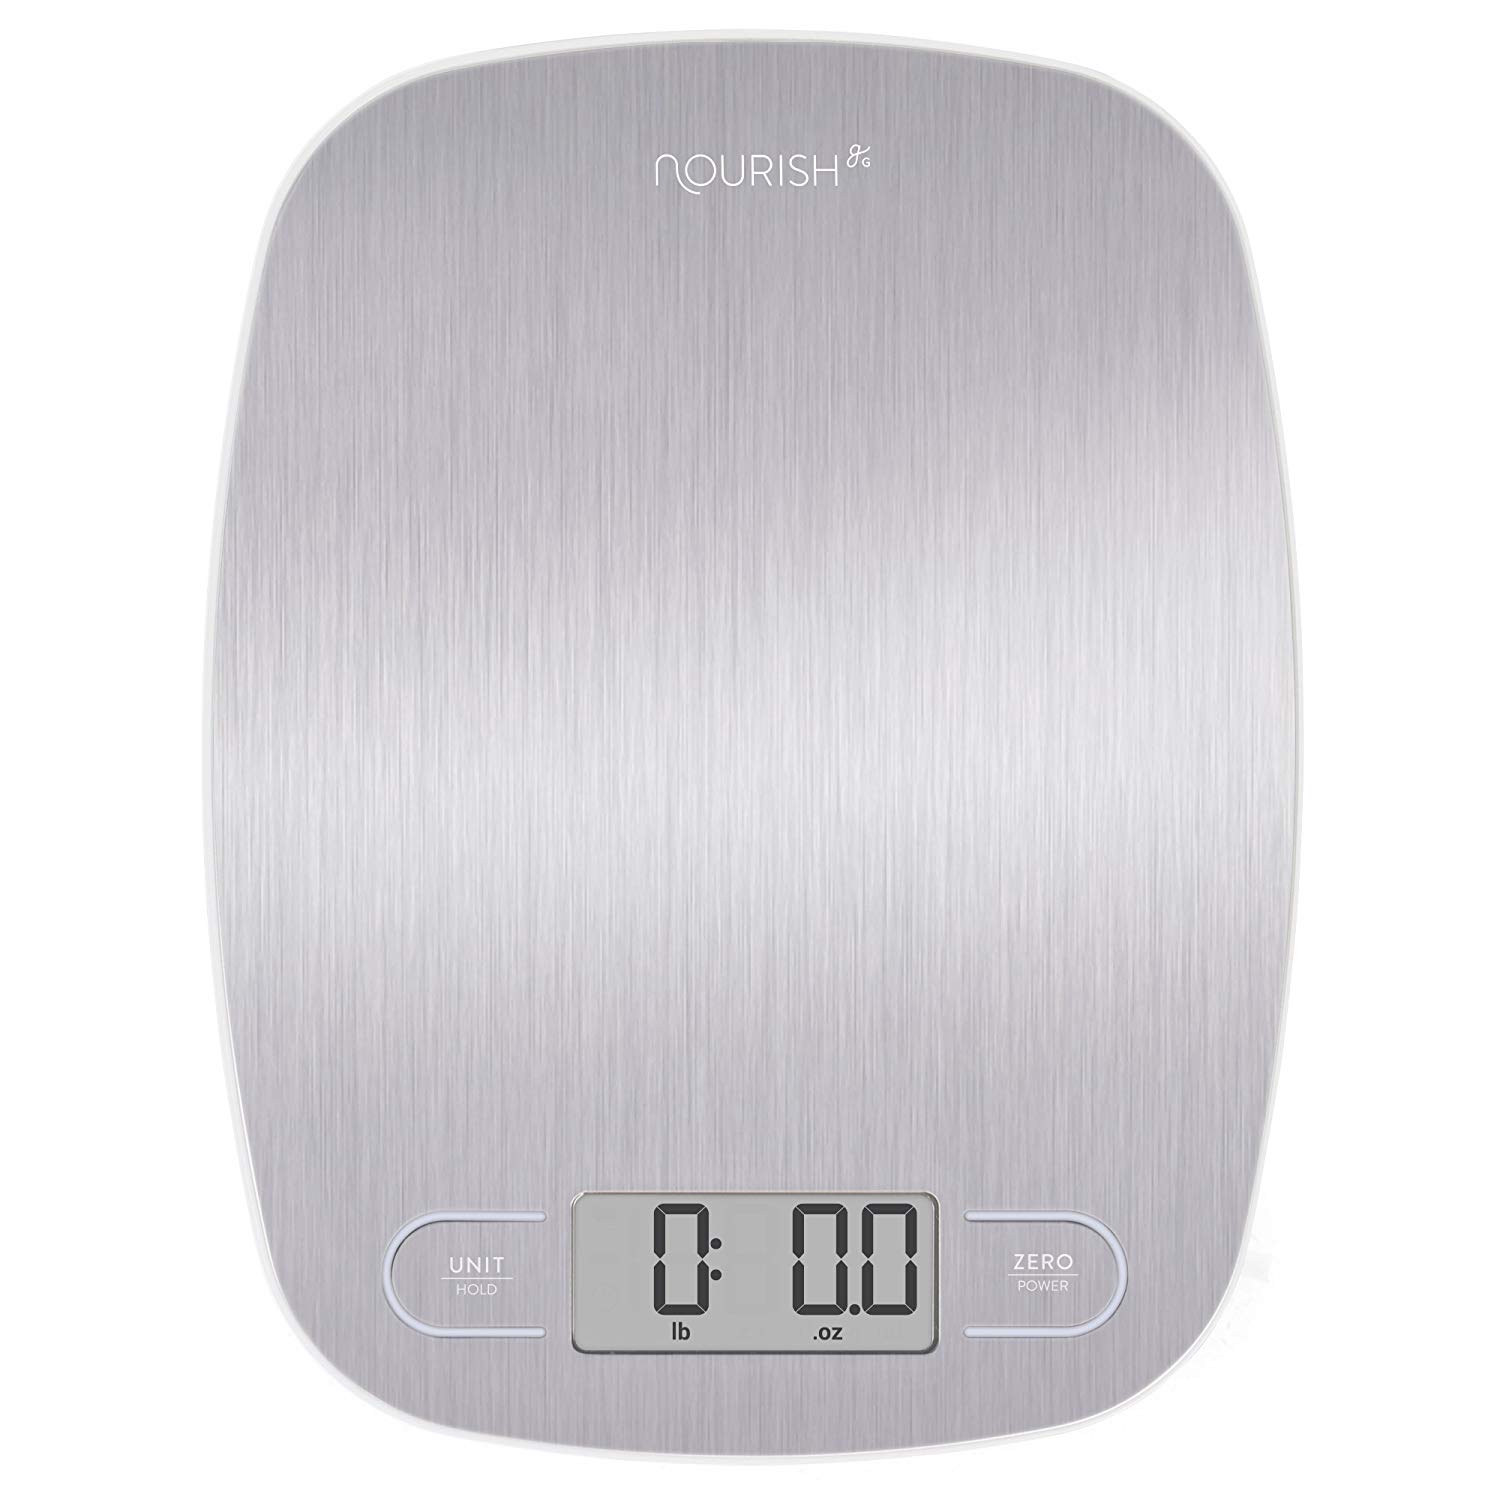  Digital Kitchen Scale Stainless Steel from Greater Goods 